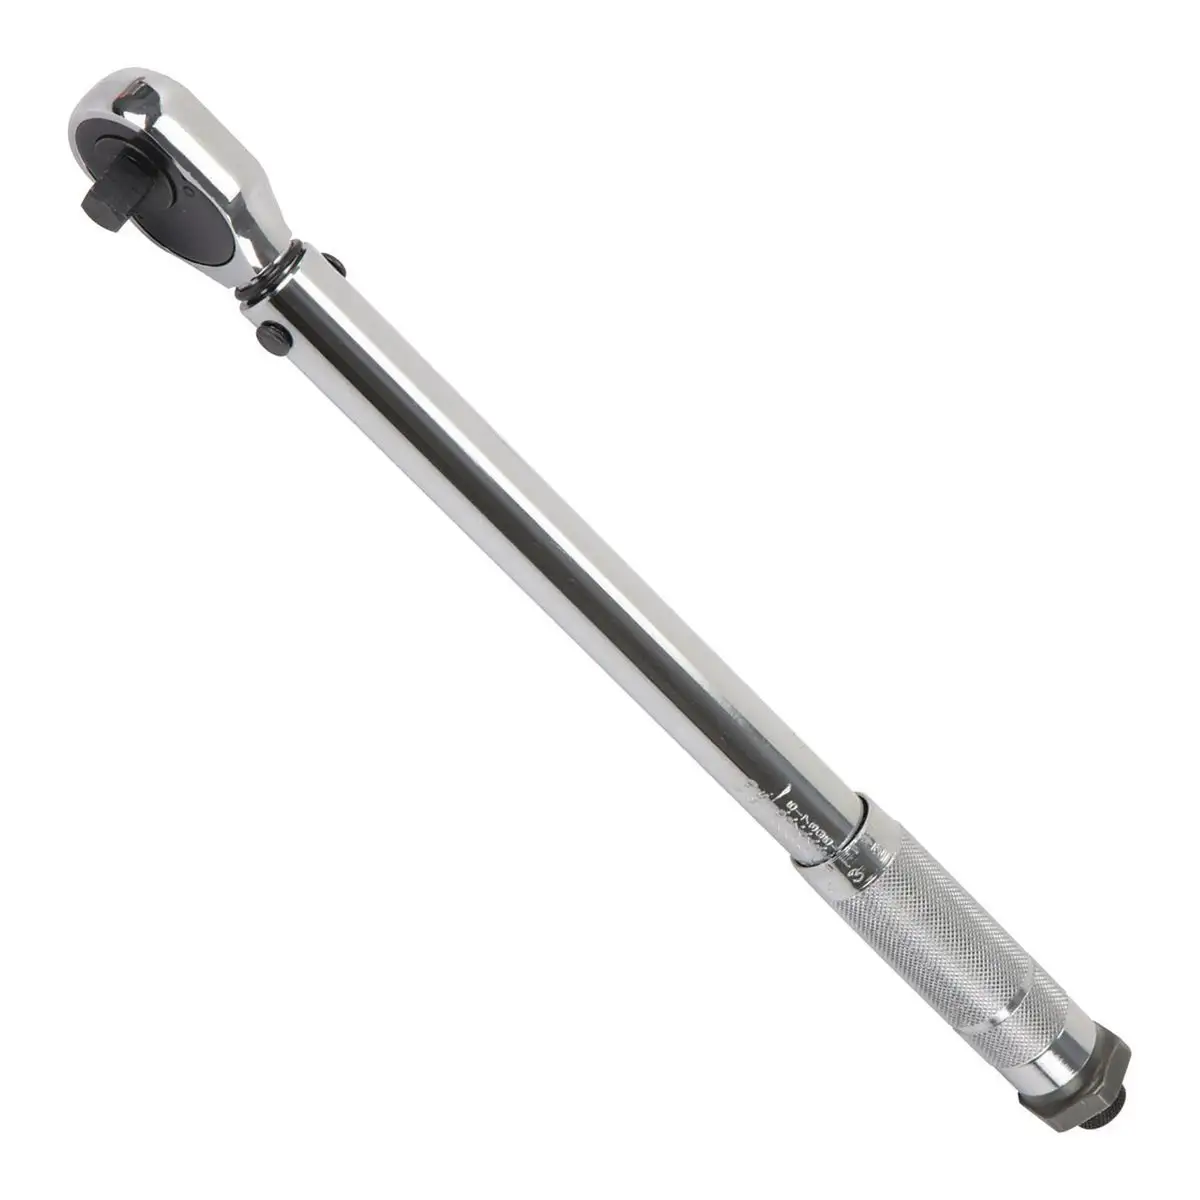 Harbor Freight Stores: Pittsburgh Pro 3/8" Drive 5-80 Ft. Lb. Click Torque Wrench